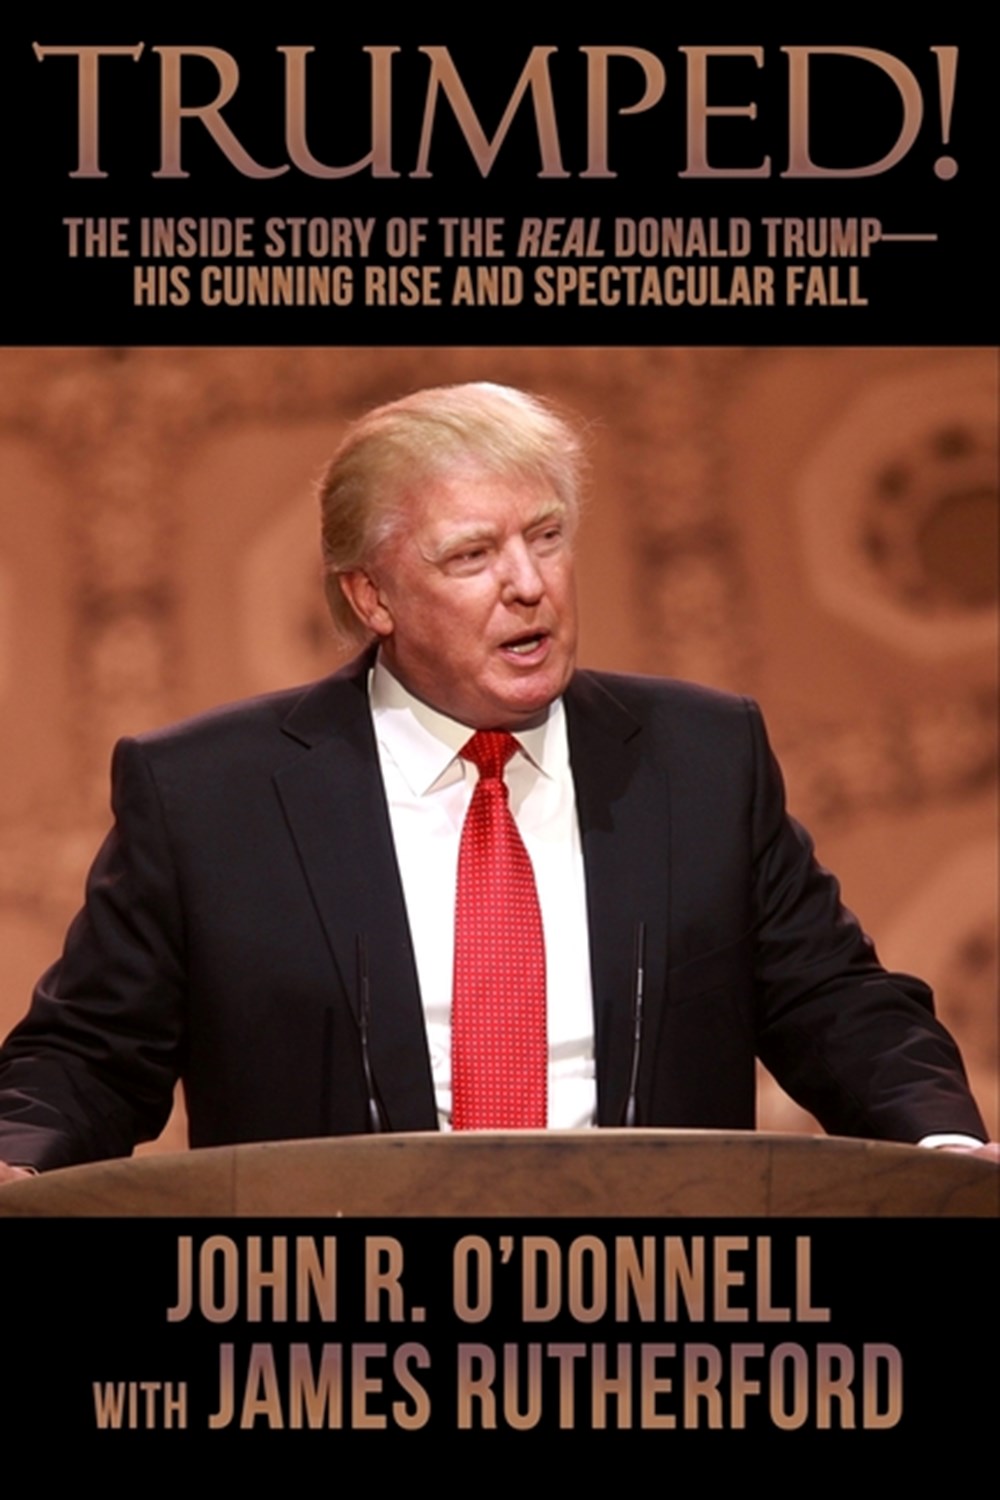 Trumped! The Inside Story of the Real Donald Trump-His Cunning Rise and Spectacular Fall